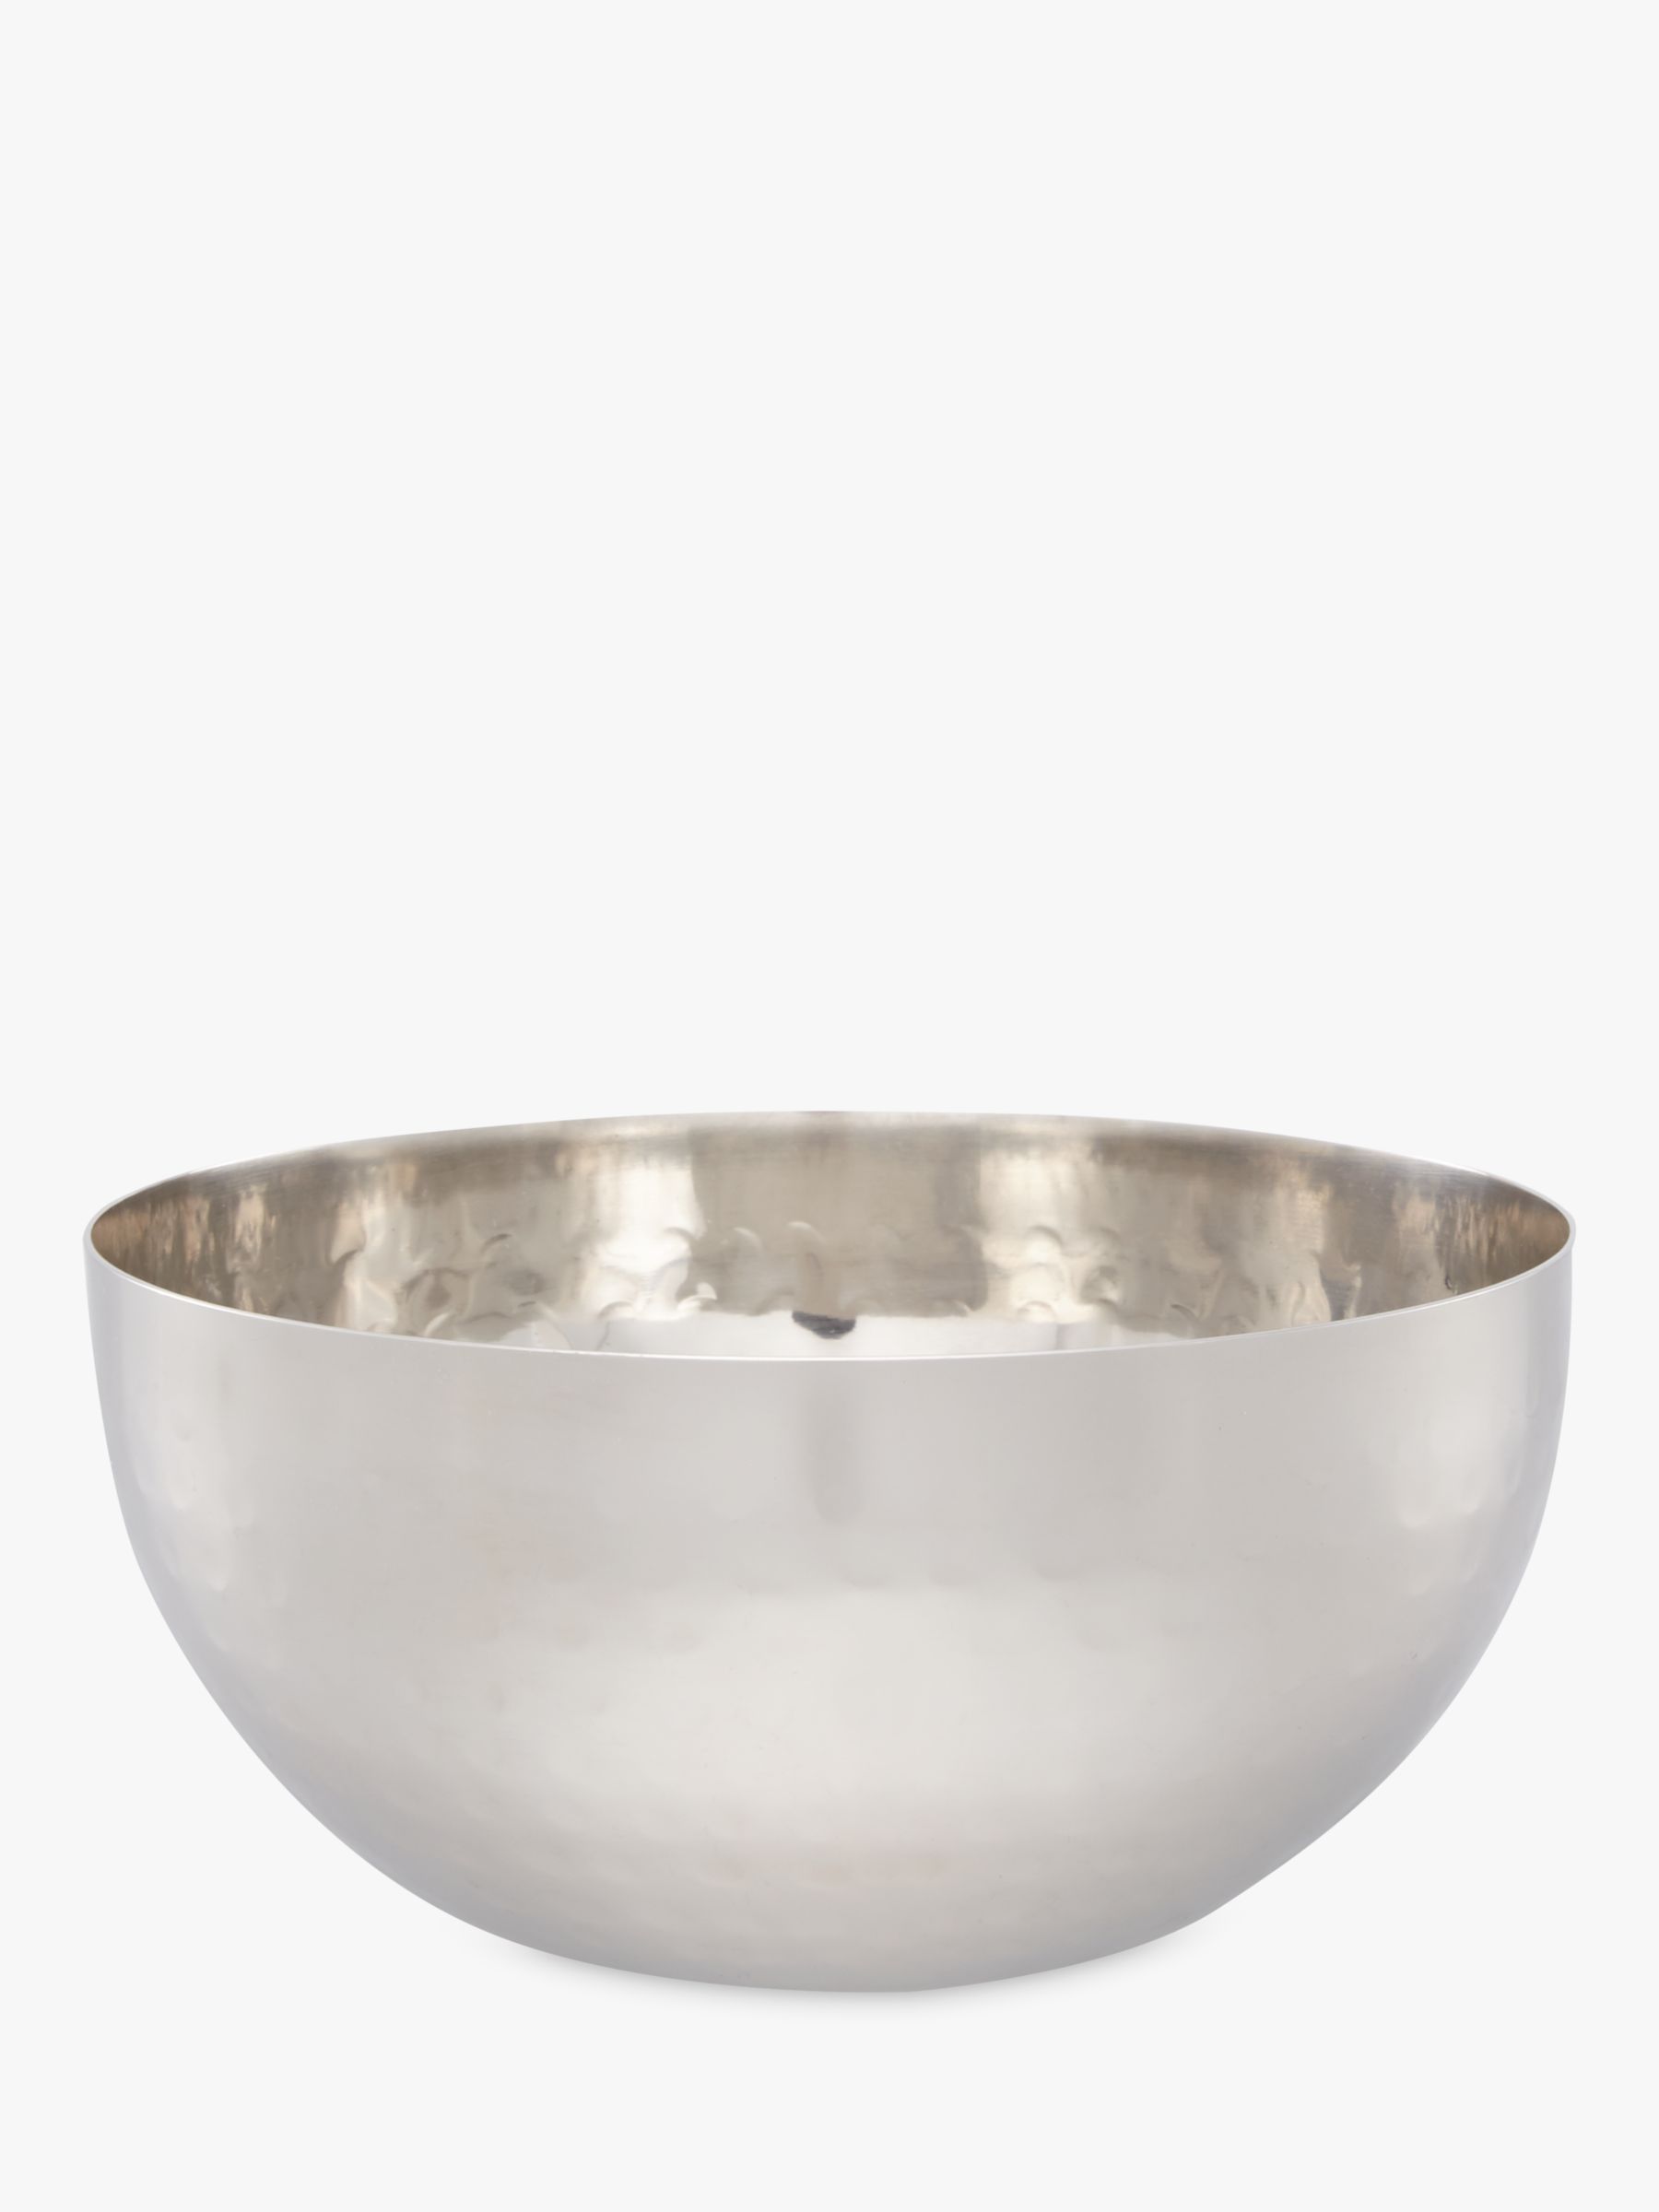 John Lewis Hammered Stainless Steel Small Serving Bowl, Dia.12cm